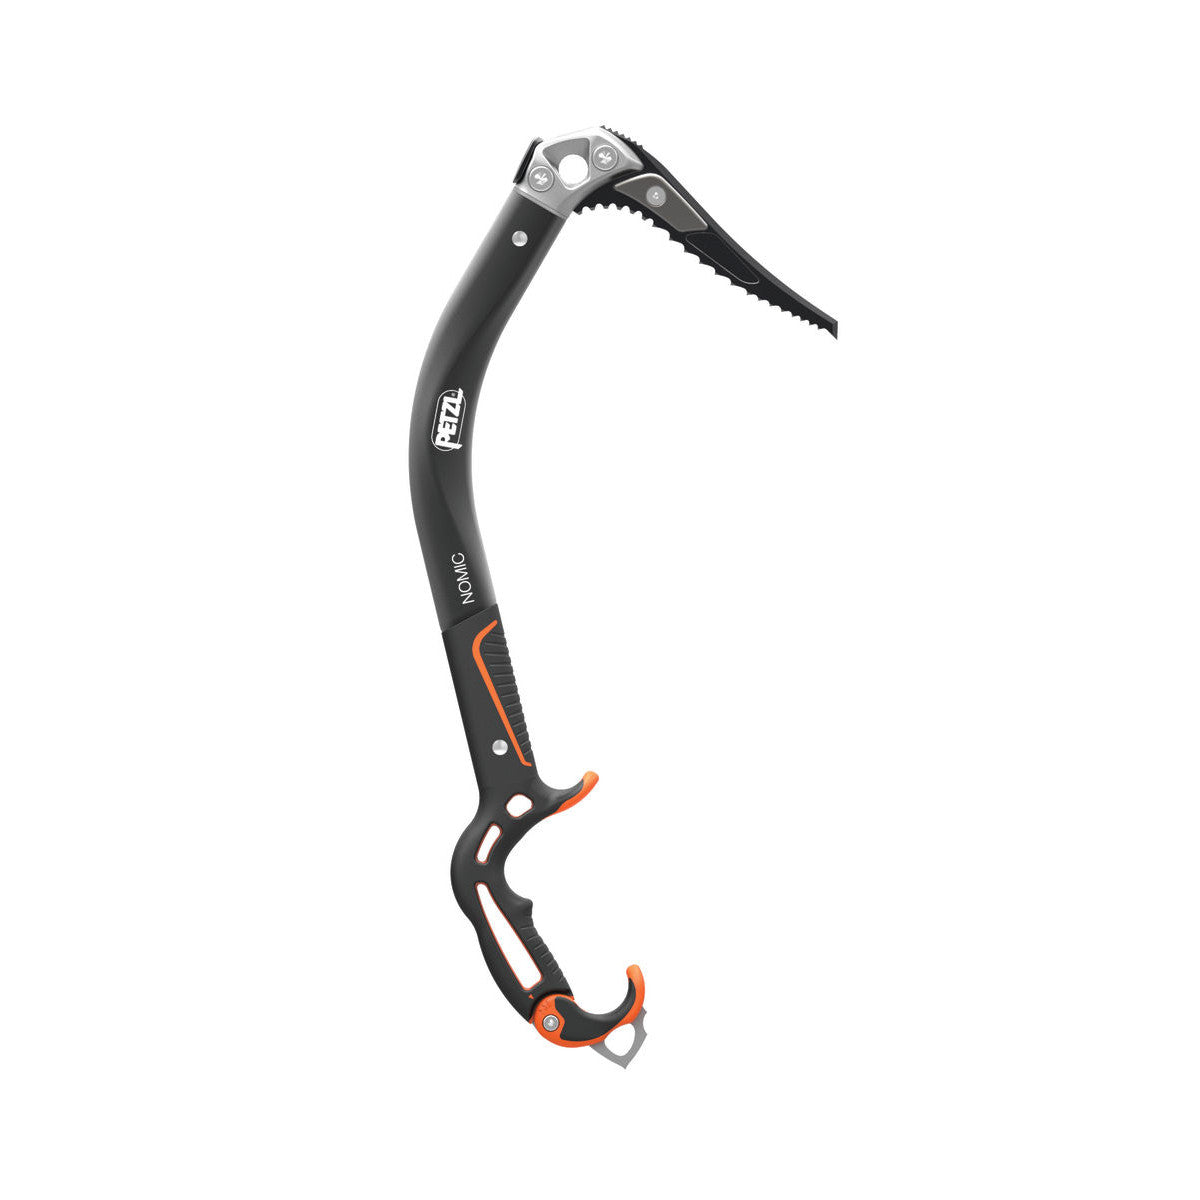 Petzl Nomic Ice Axe, side view shown with black handle, shaft and pick